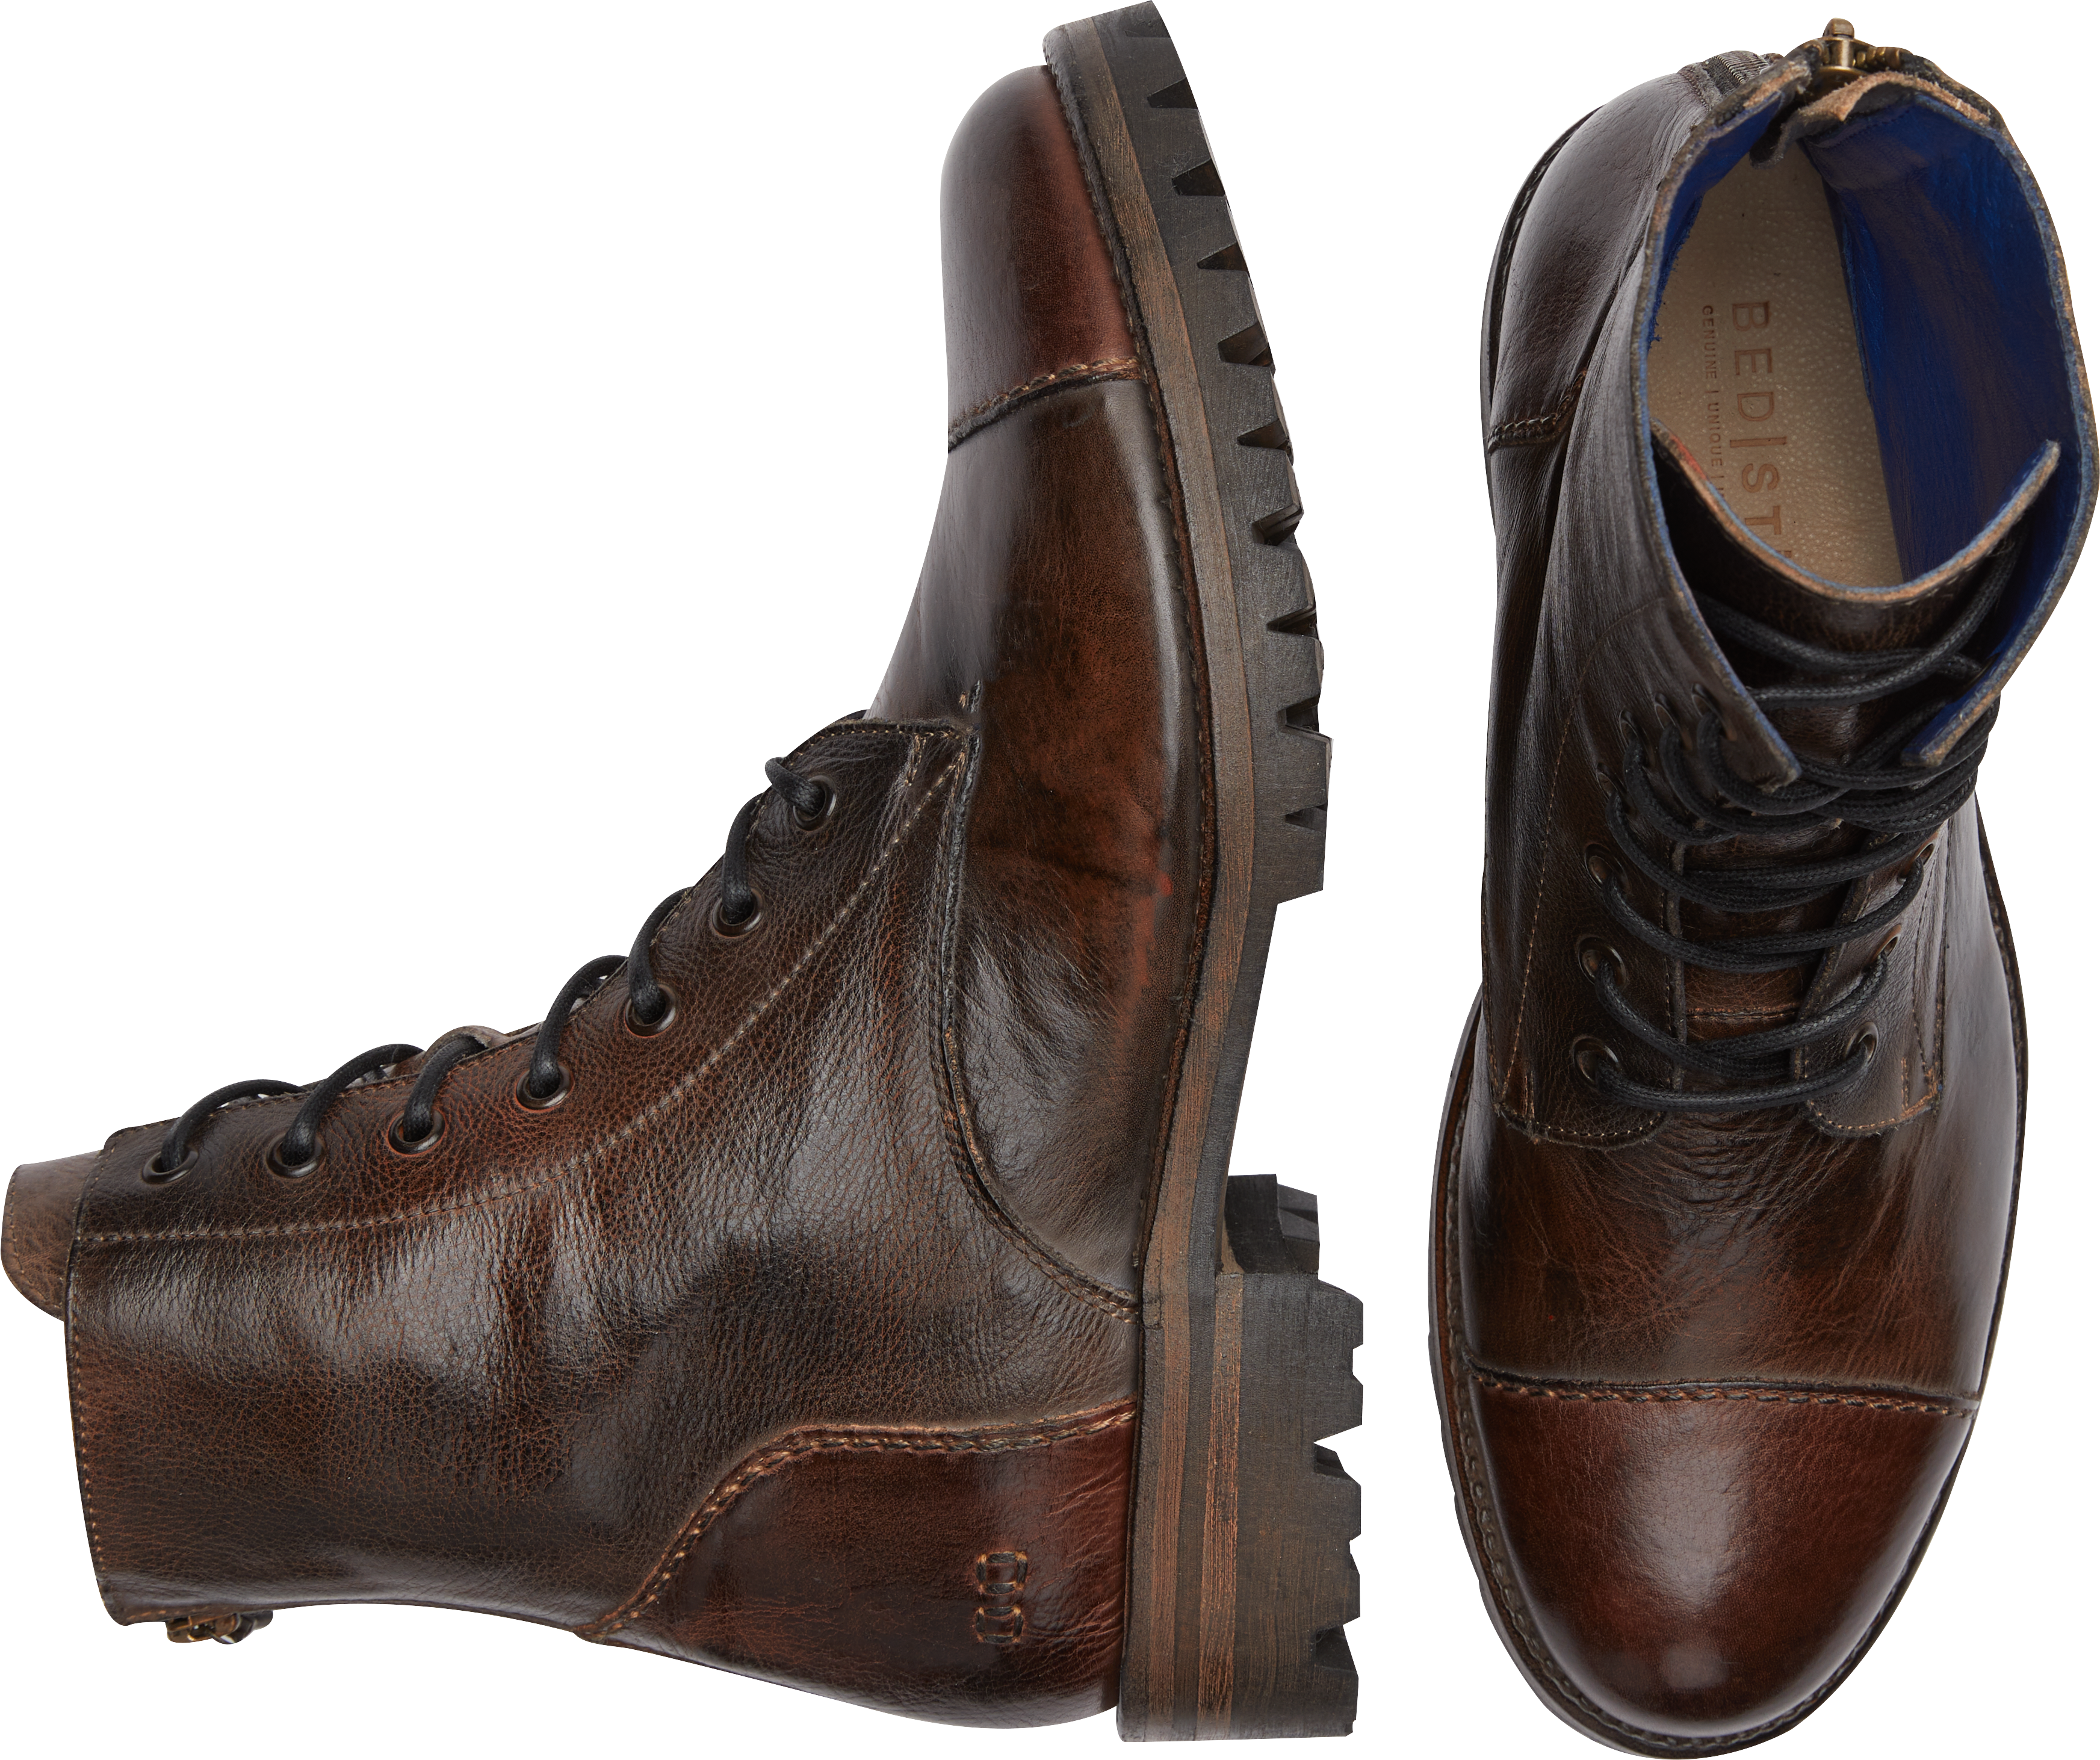 Men's Casual Shoes: Sneakers, Boots and more - Replay Official Store